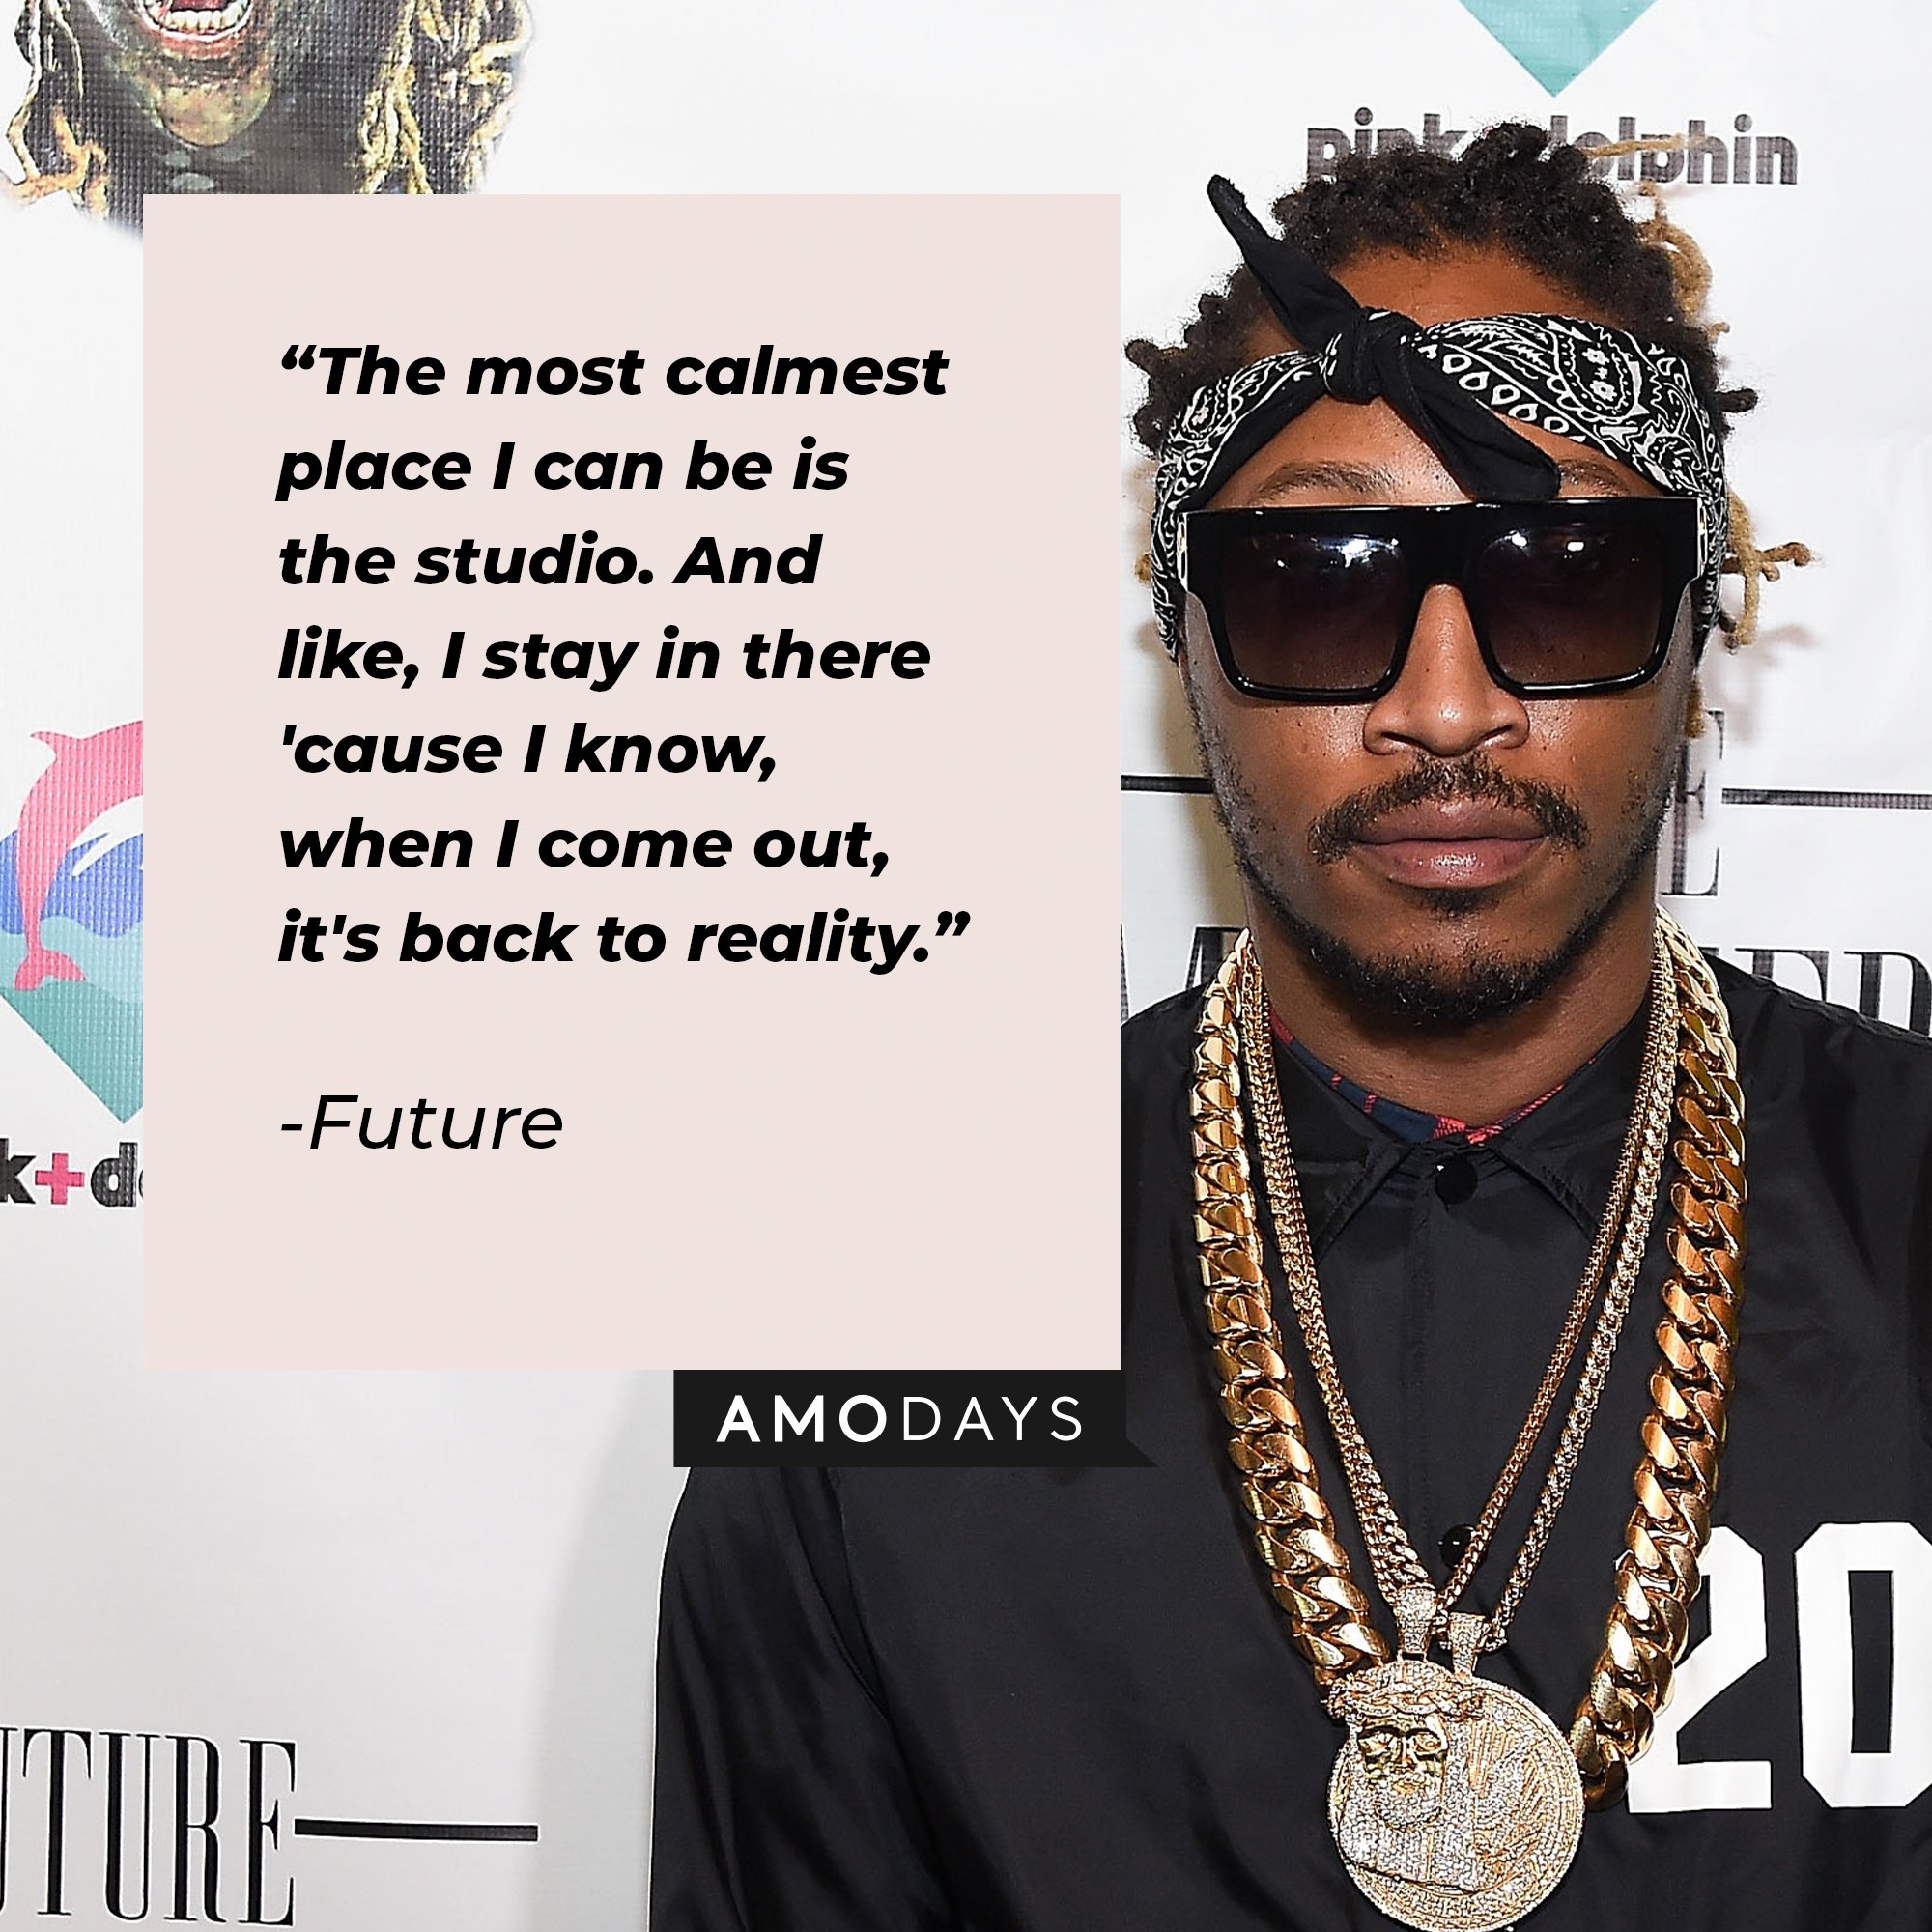 Future’s quote: "The most calmest place I can be is the studio. And like, I stay in there 'cause I know, when I come out, it's back to reality." | Image: AmoDays